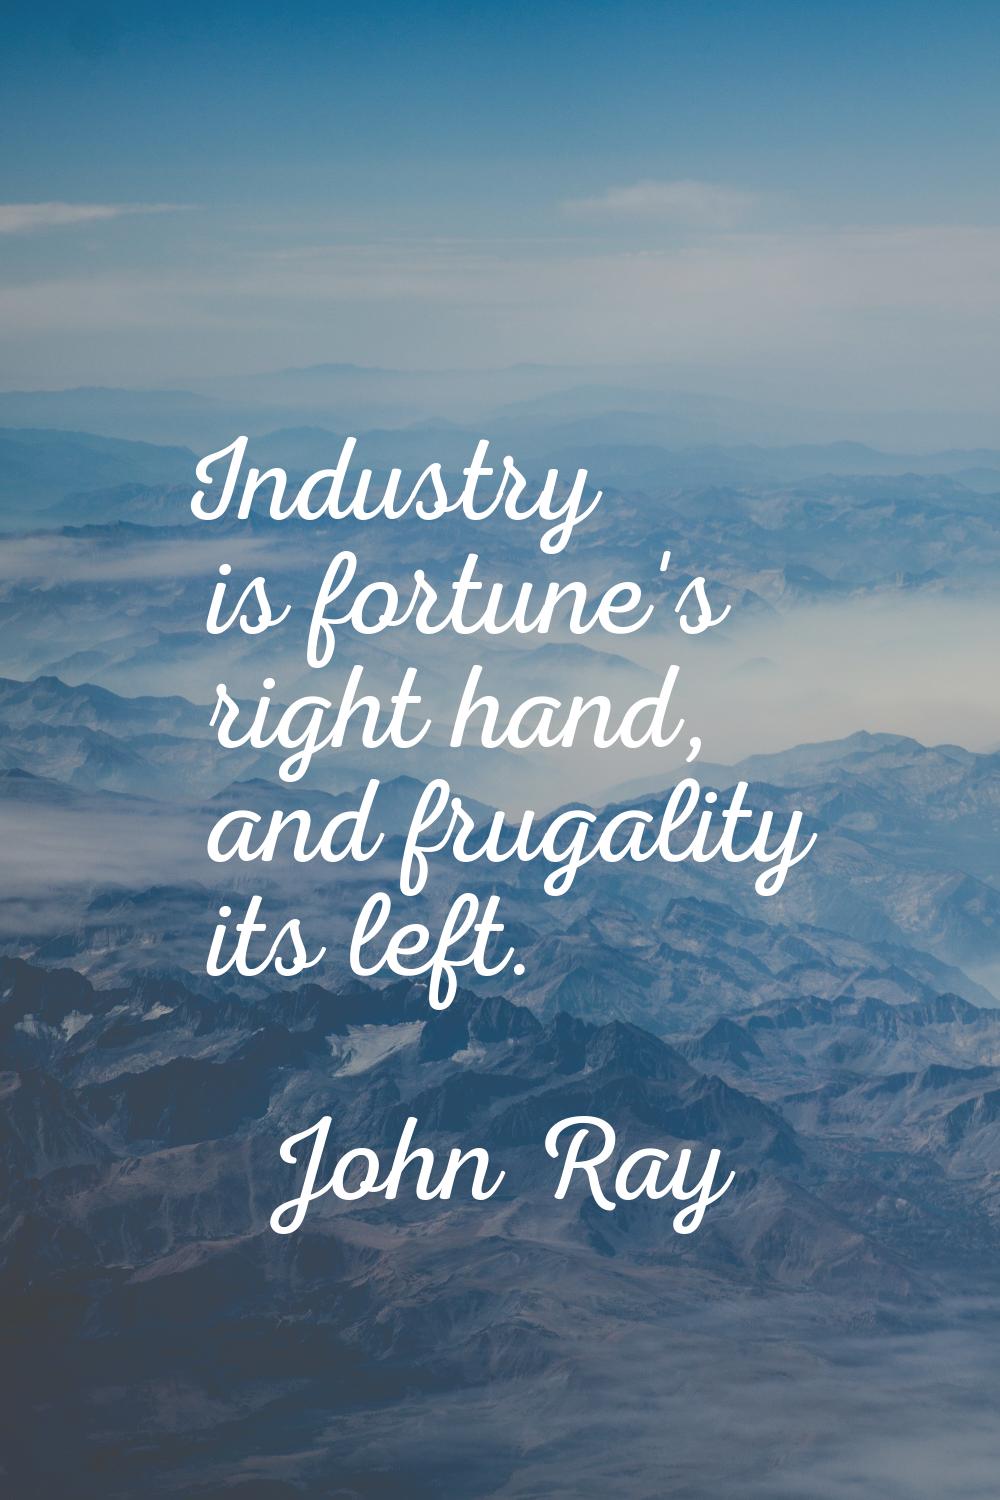 Industry is fortune's right hand, and frugality its left.